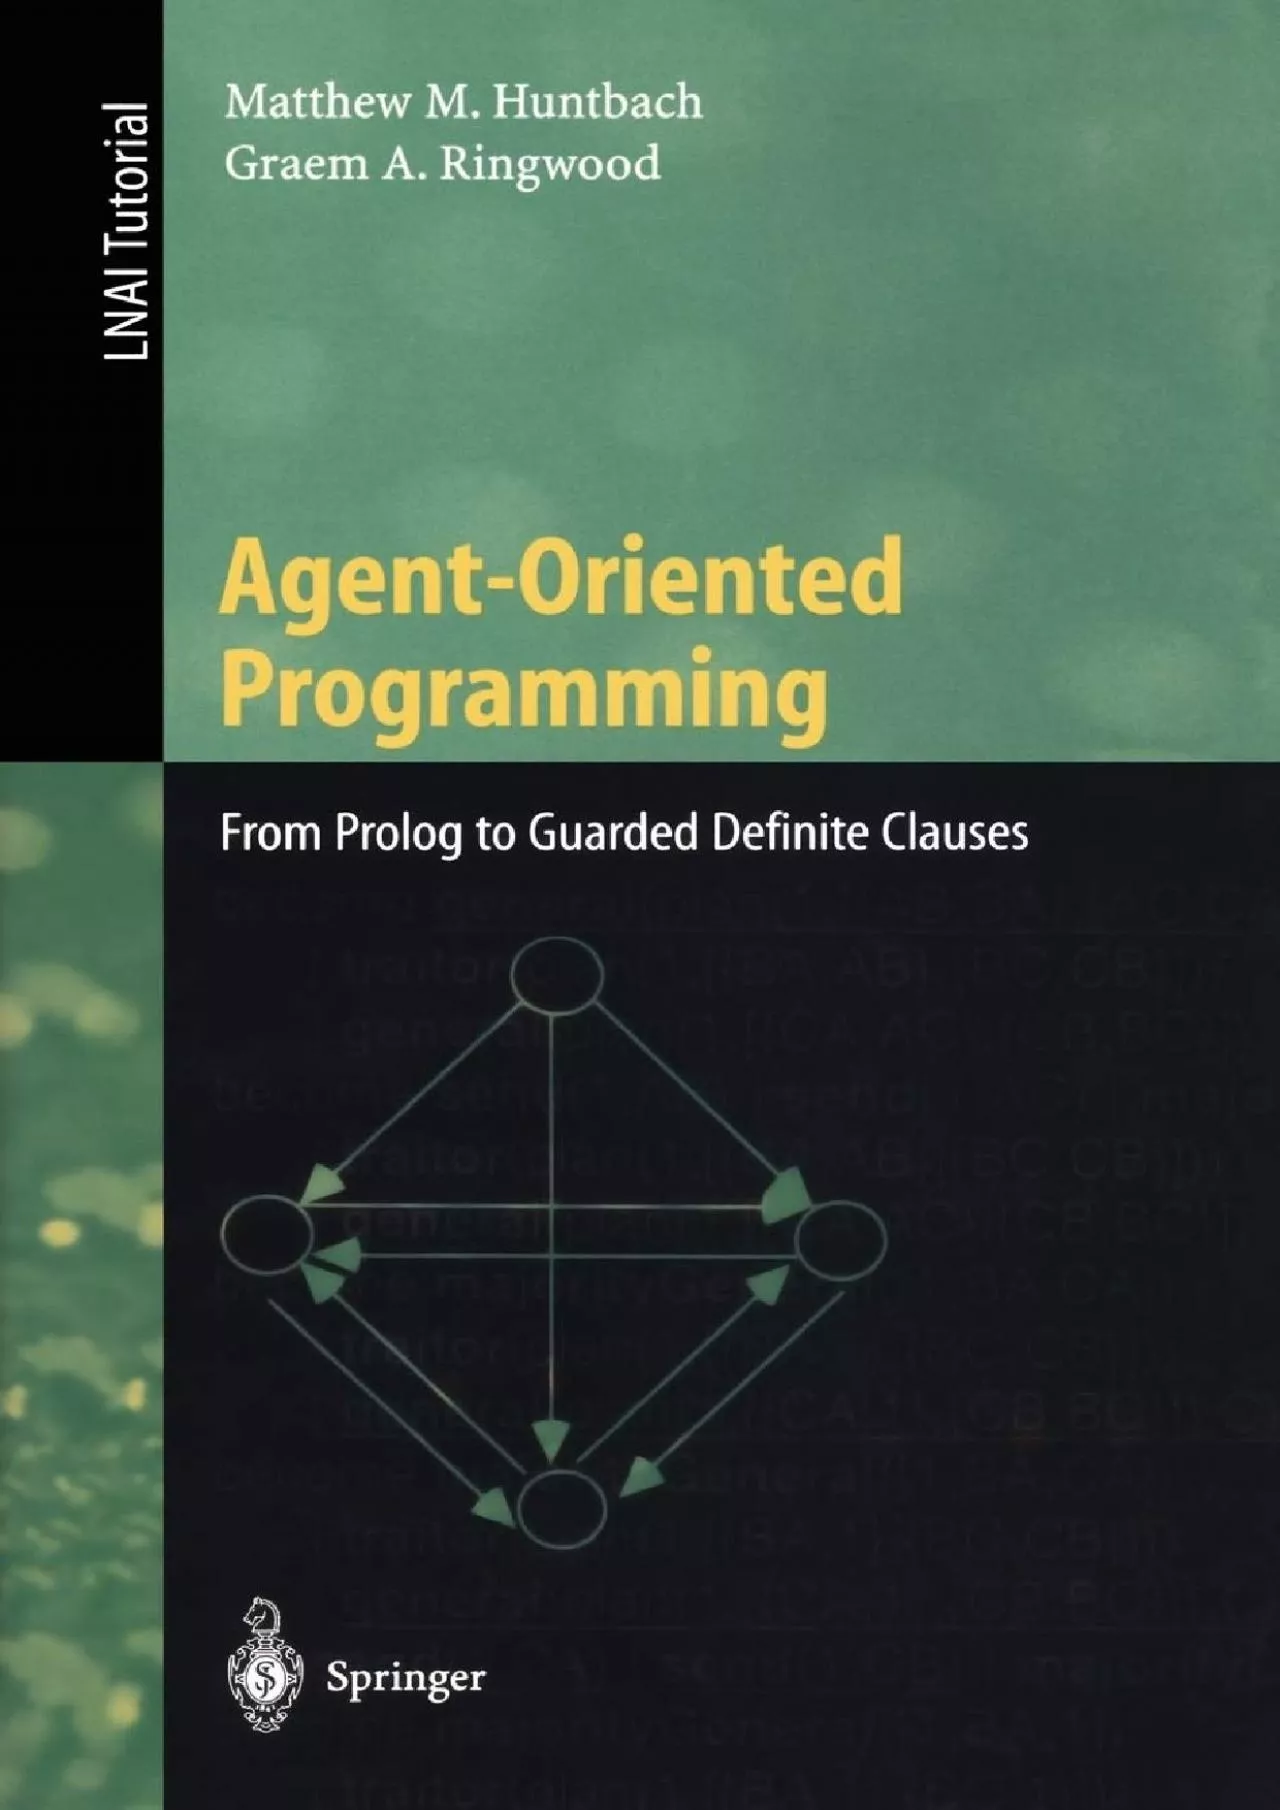 [eBOOK]-Agent-Oriented Programming: From Prolog to Guarded Definite Clauses (Lecture Notes